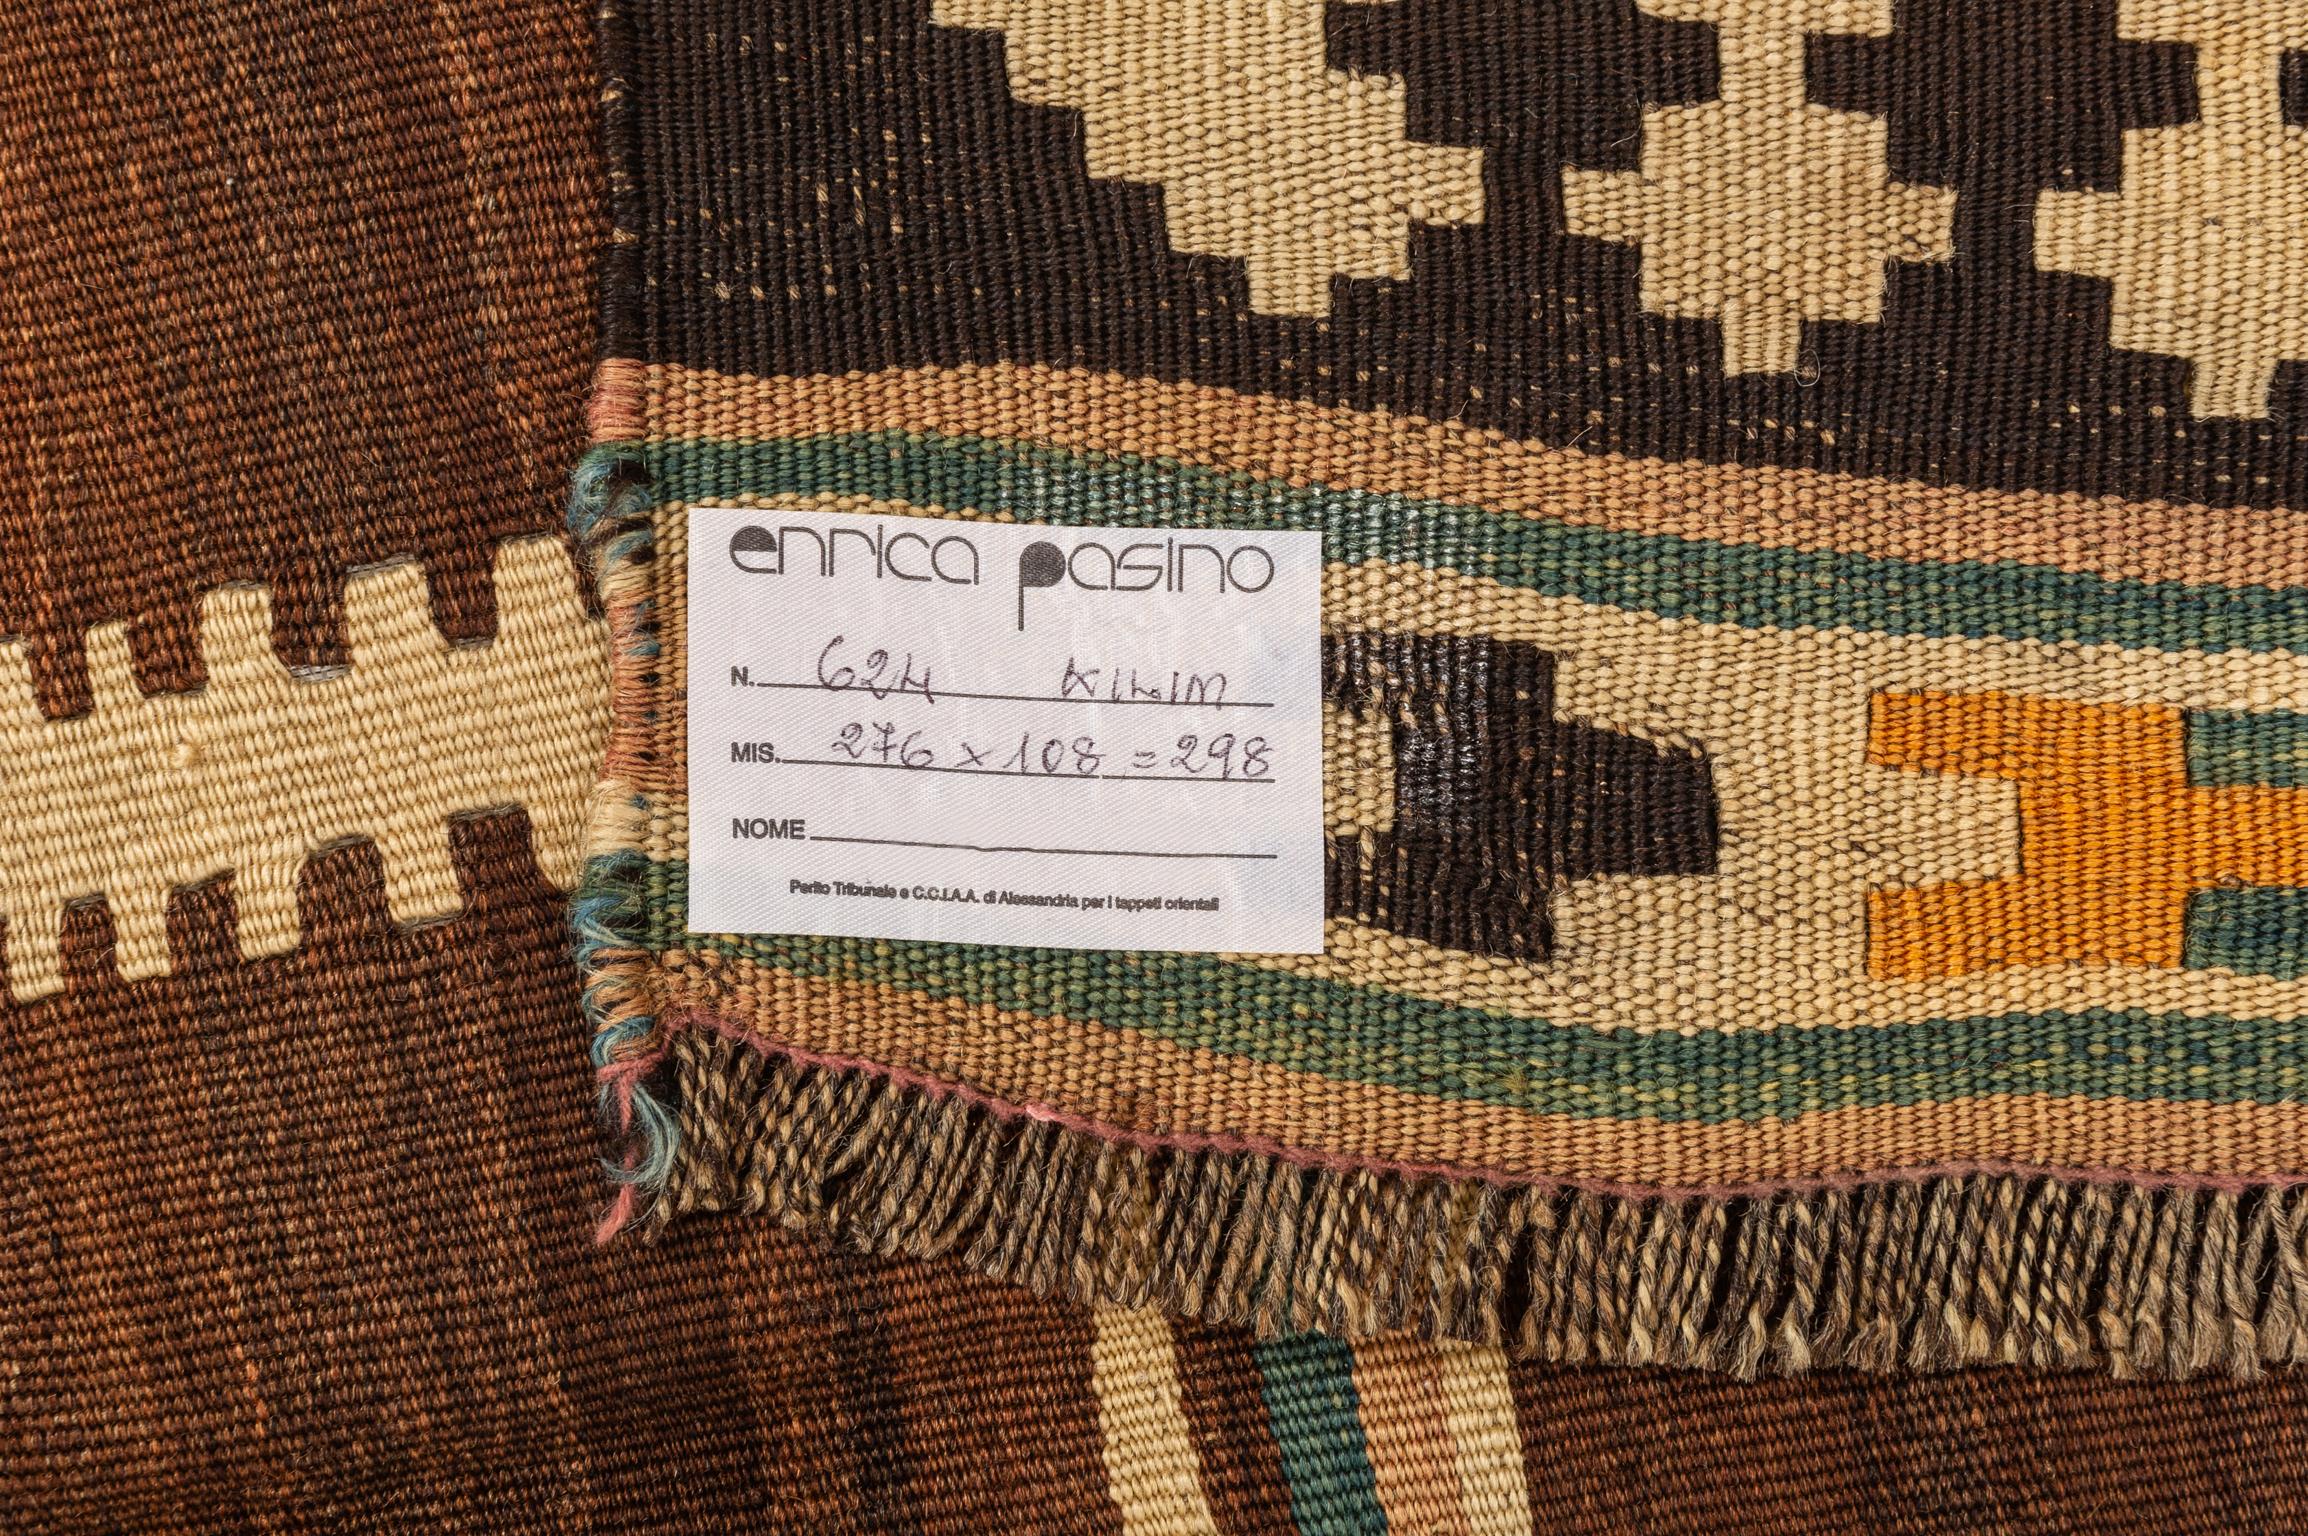 nr. 624 -  For this carpet : wool dyed with vegetable substances: brown by walnut husk, yellow with saffron.
Very beautiful and elegant in its simplicity, even in front of a wardrobe or a bookcase.
From my private collection for Your home.